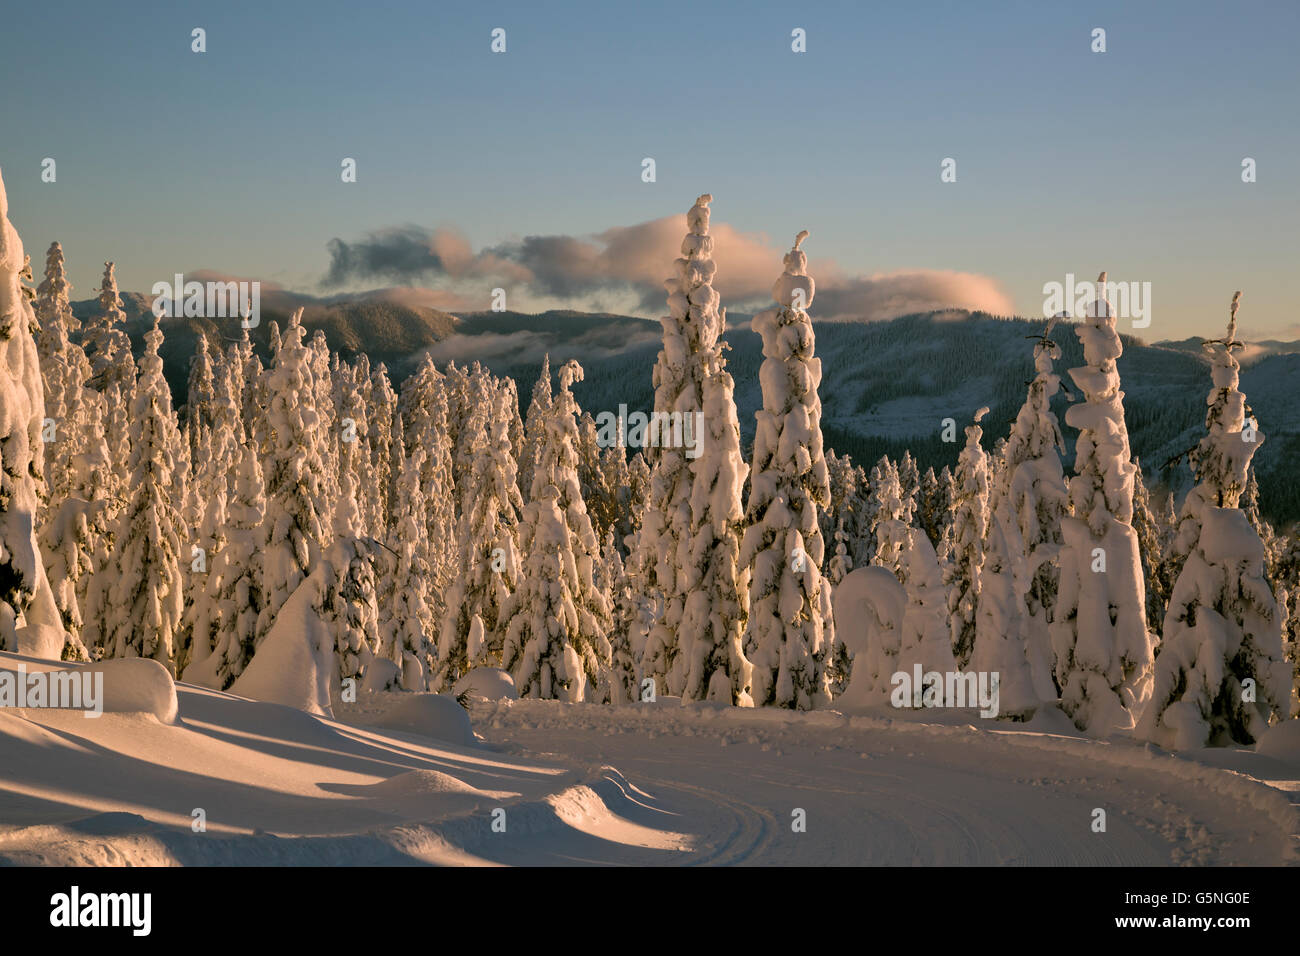 WASHINGTON - Late afternoon light on the snow covered trees near the summit of Amabilis Mountain near Snoqualmie Pass. Stock Photo